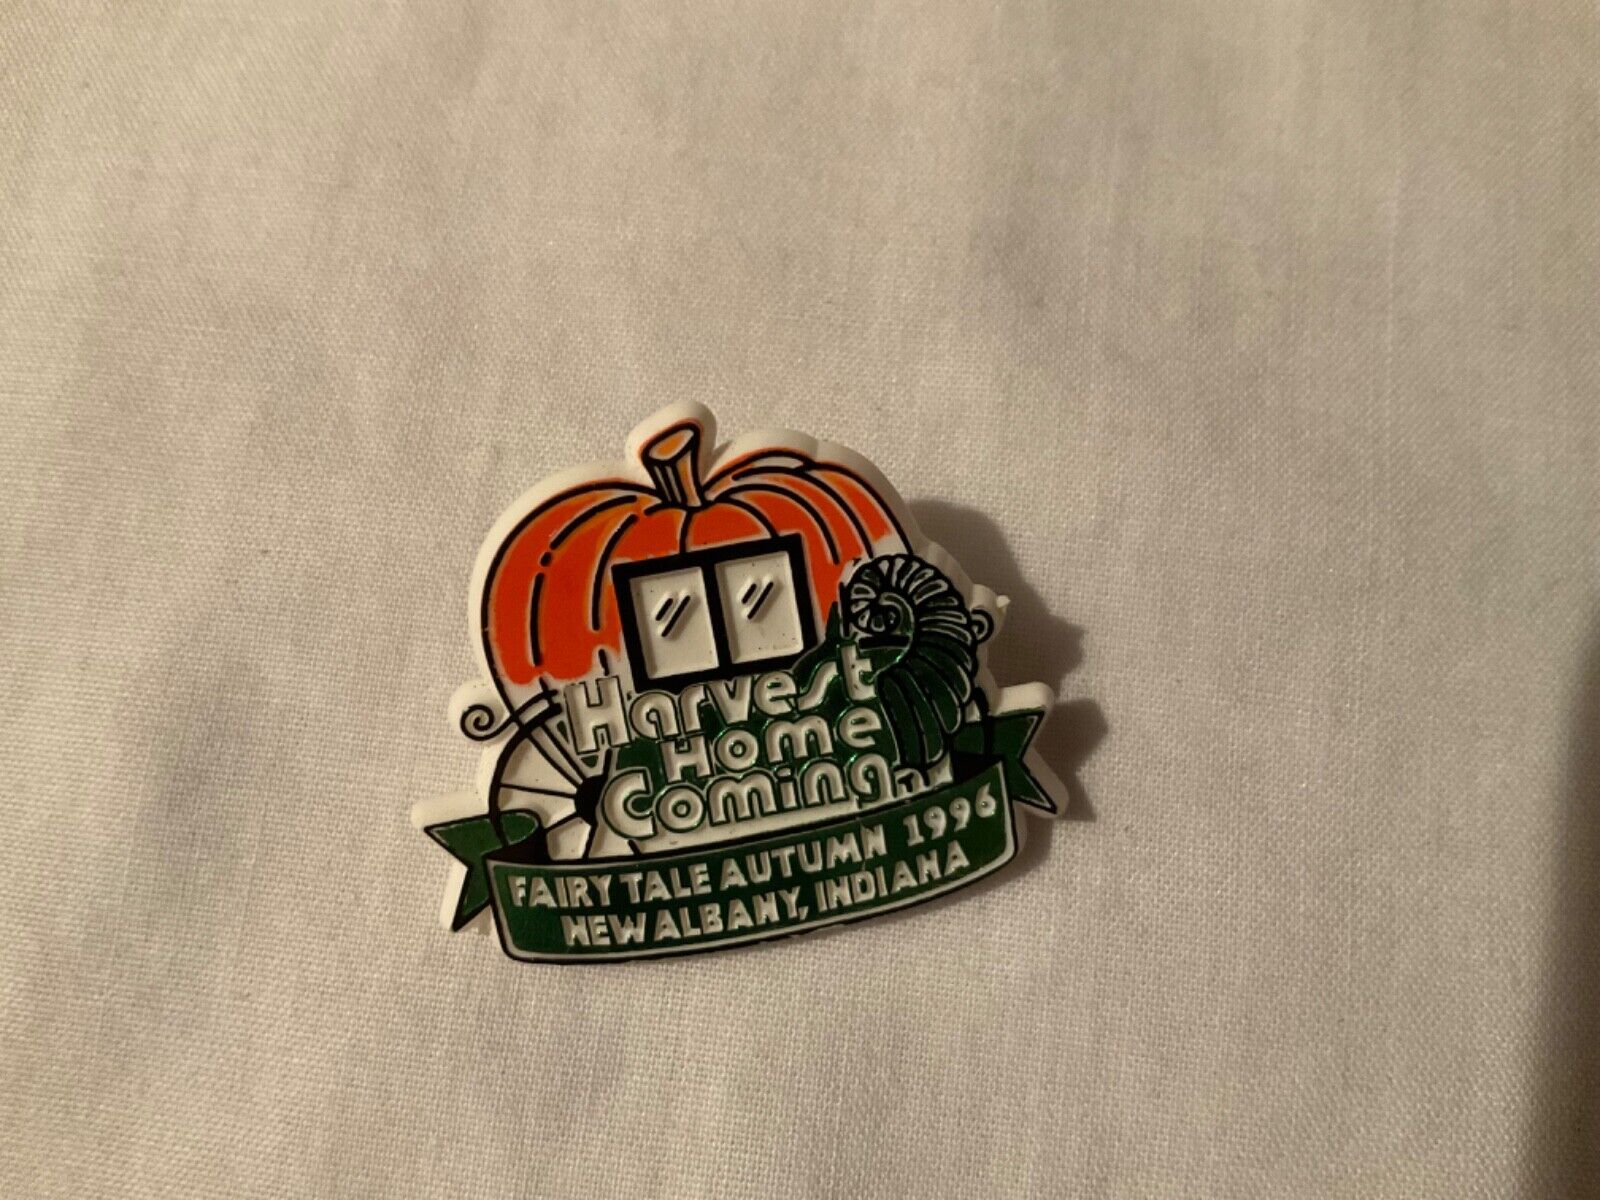 Harvest Homecoming New Albany INDIANA Vintage 1996 Lapel Pin - FAIRY TALE AUTUMN